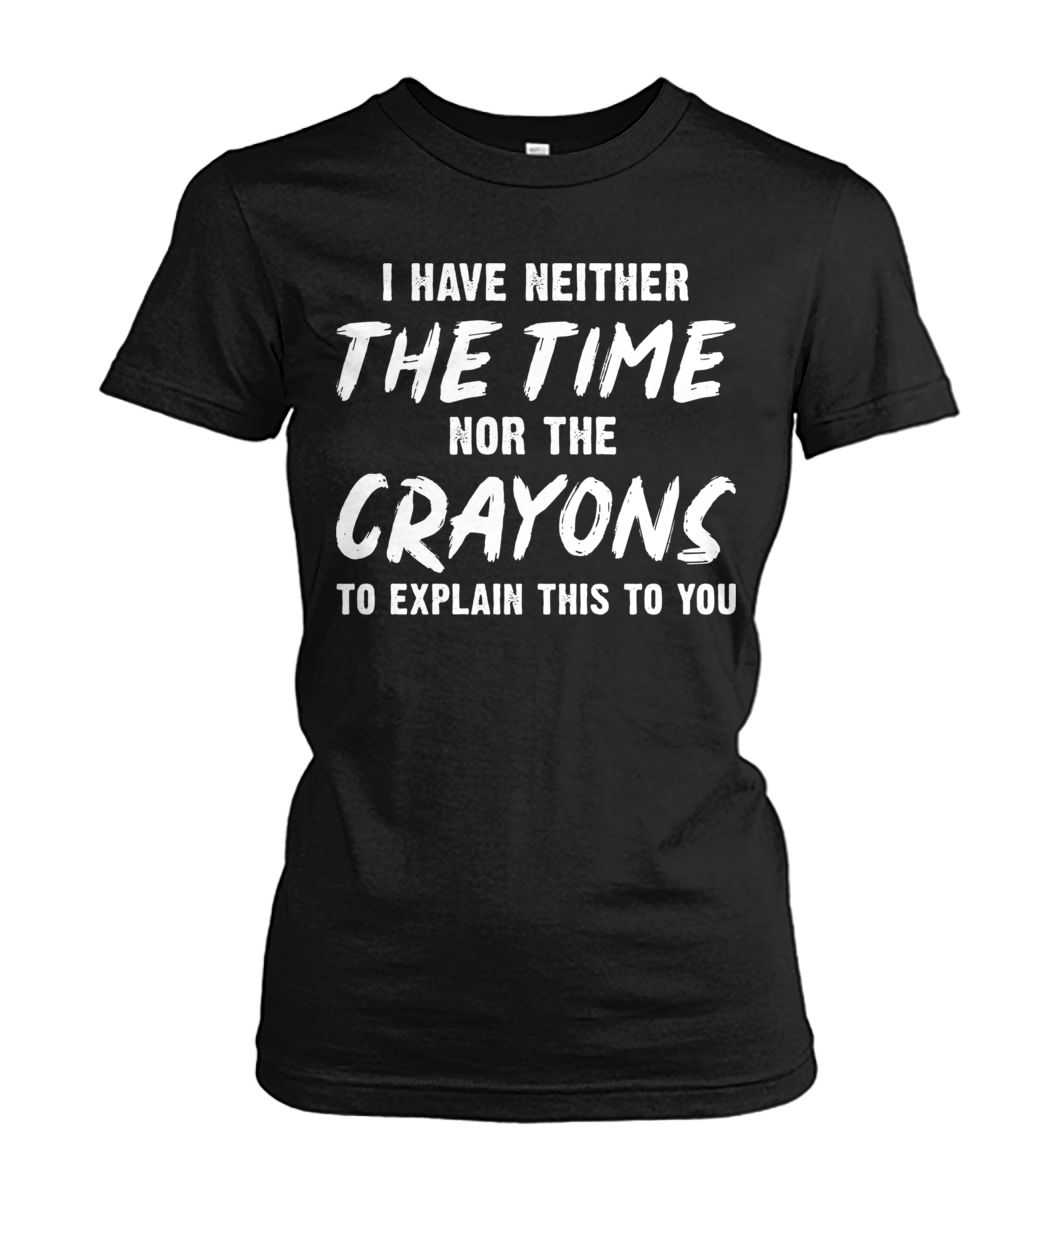 I have neither the time nor the crayons to explain this to you women's crew tee